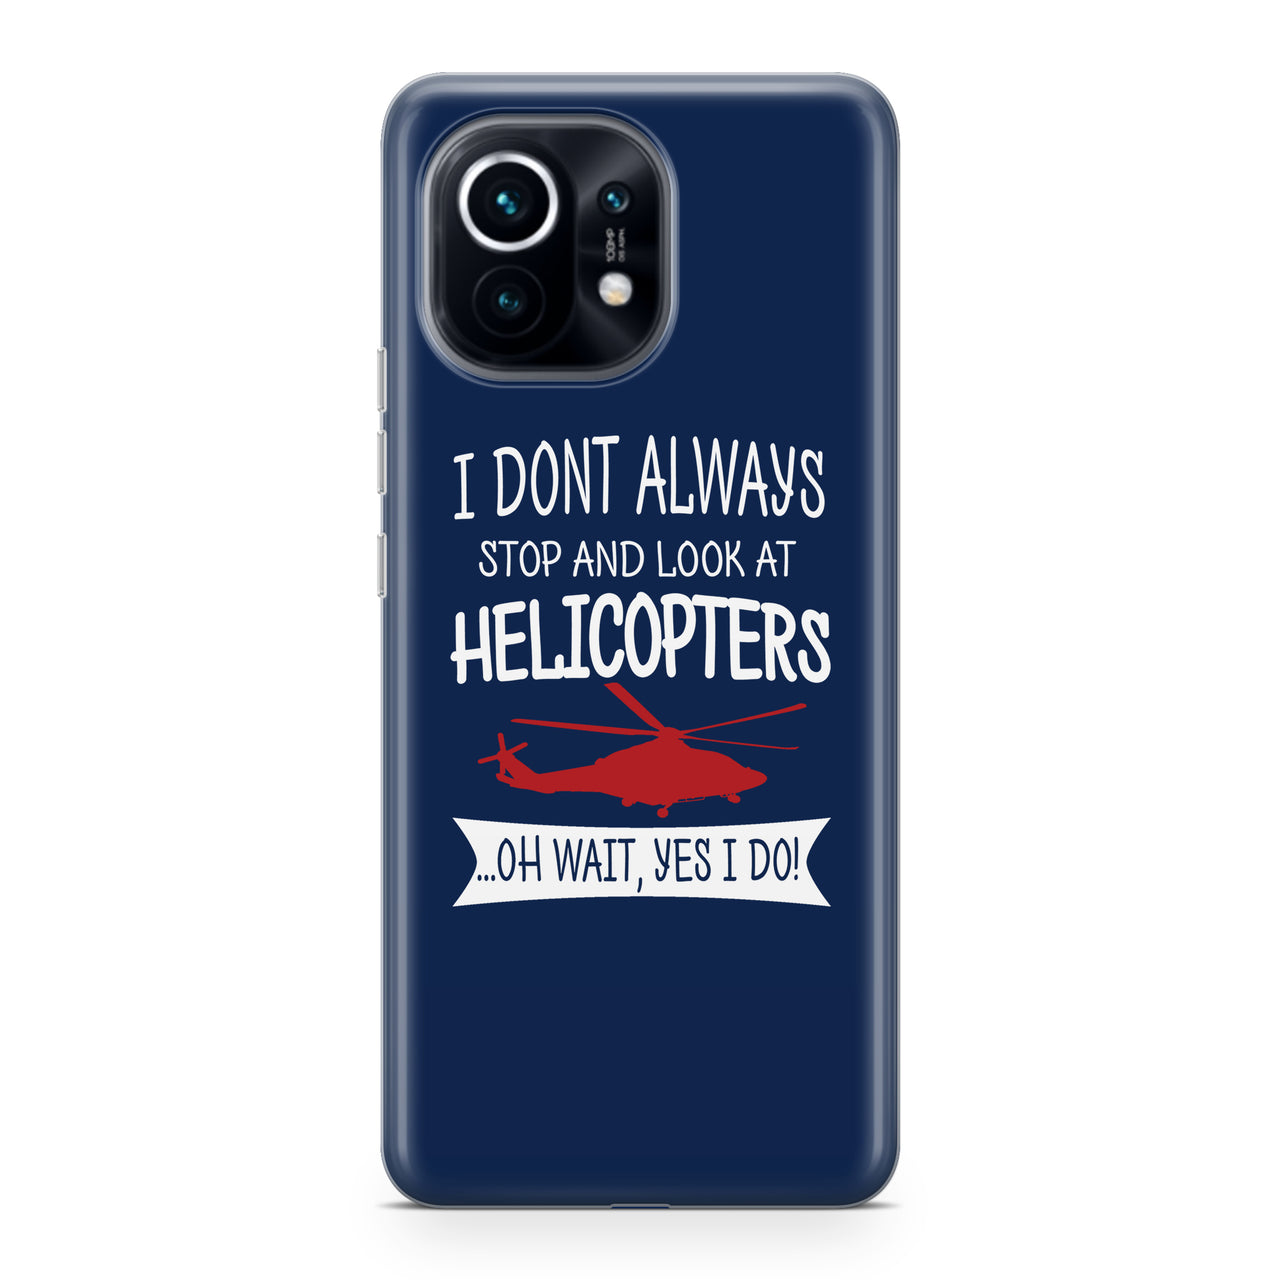 I Don't Always Stop and Look at Helicopters Designed Xiaomi Cases